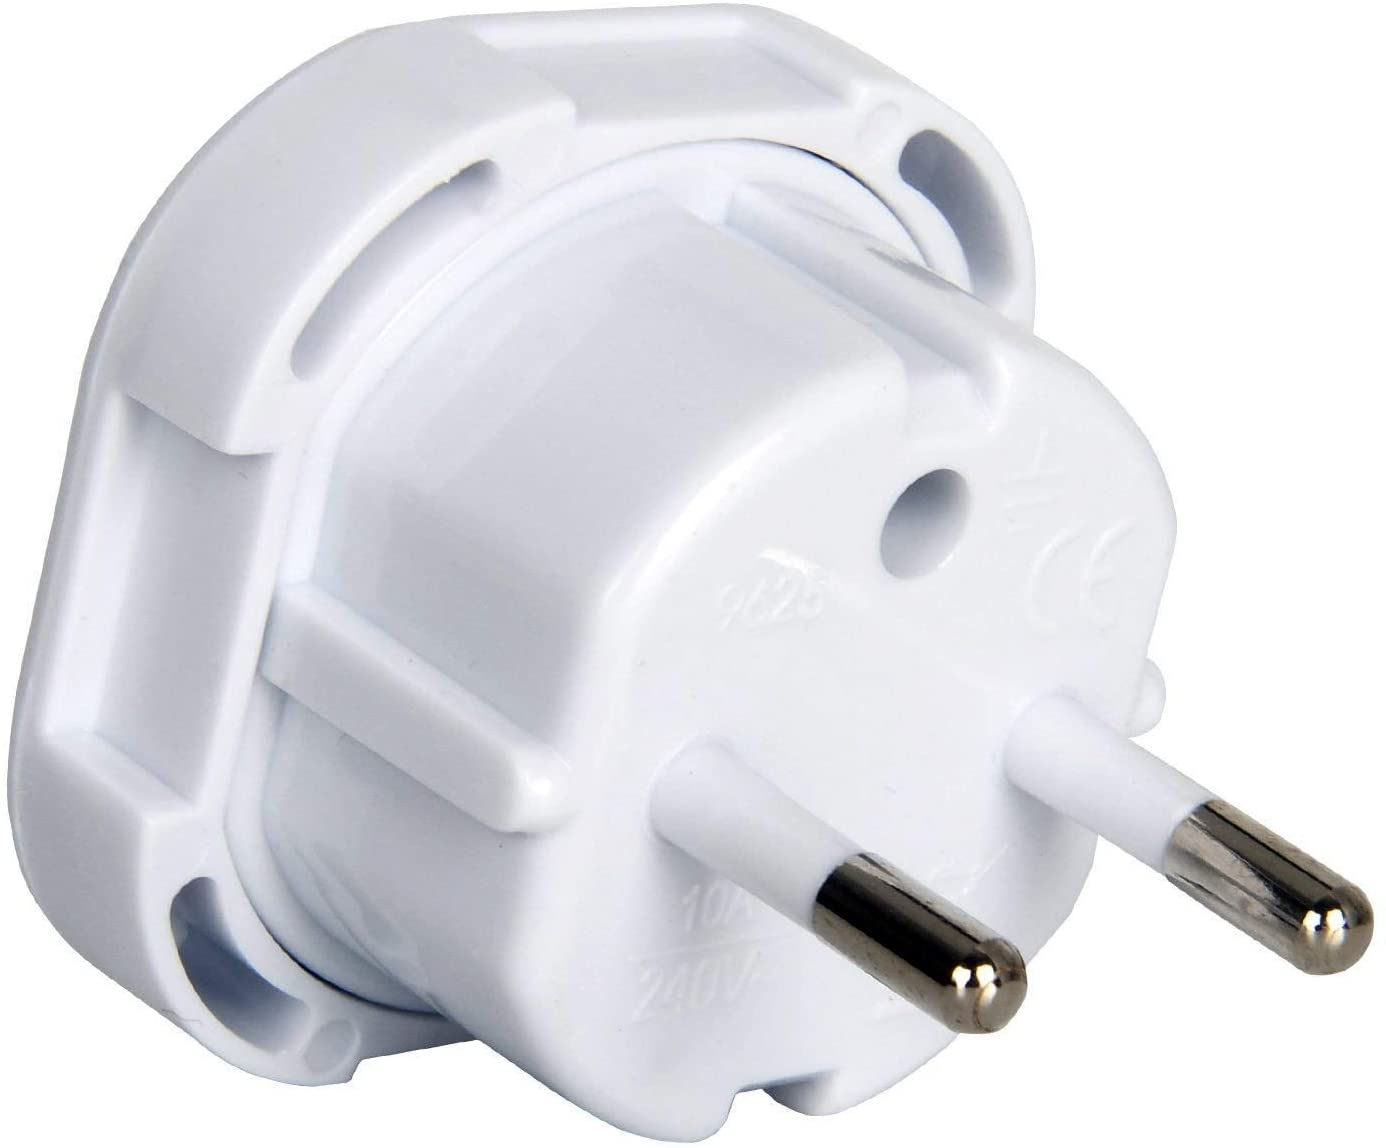 uk to greece travel adapter